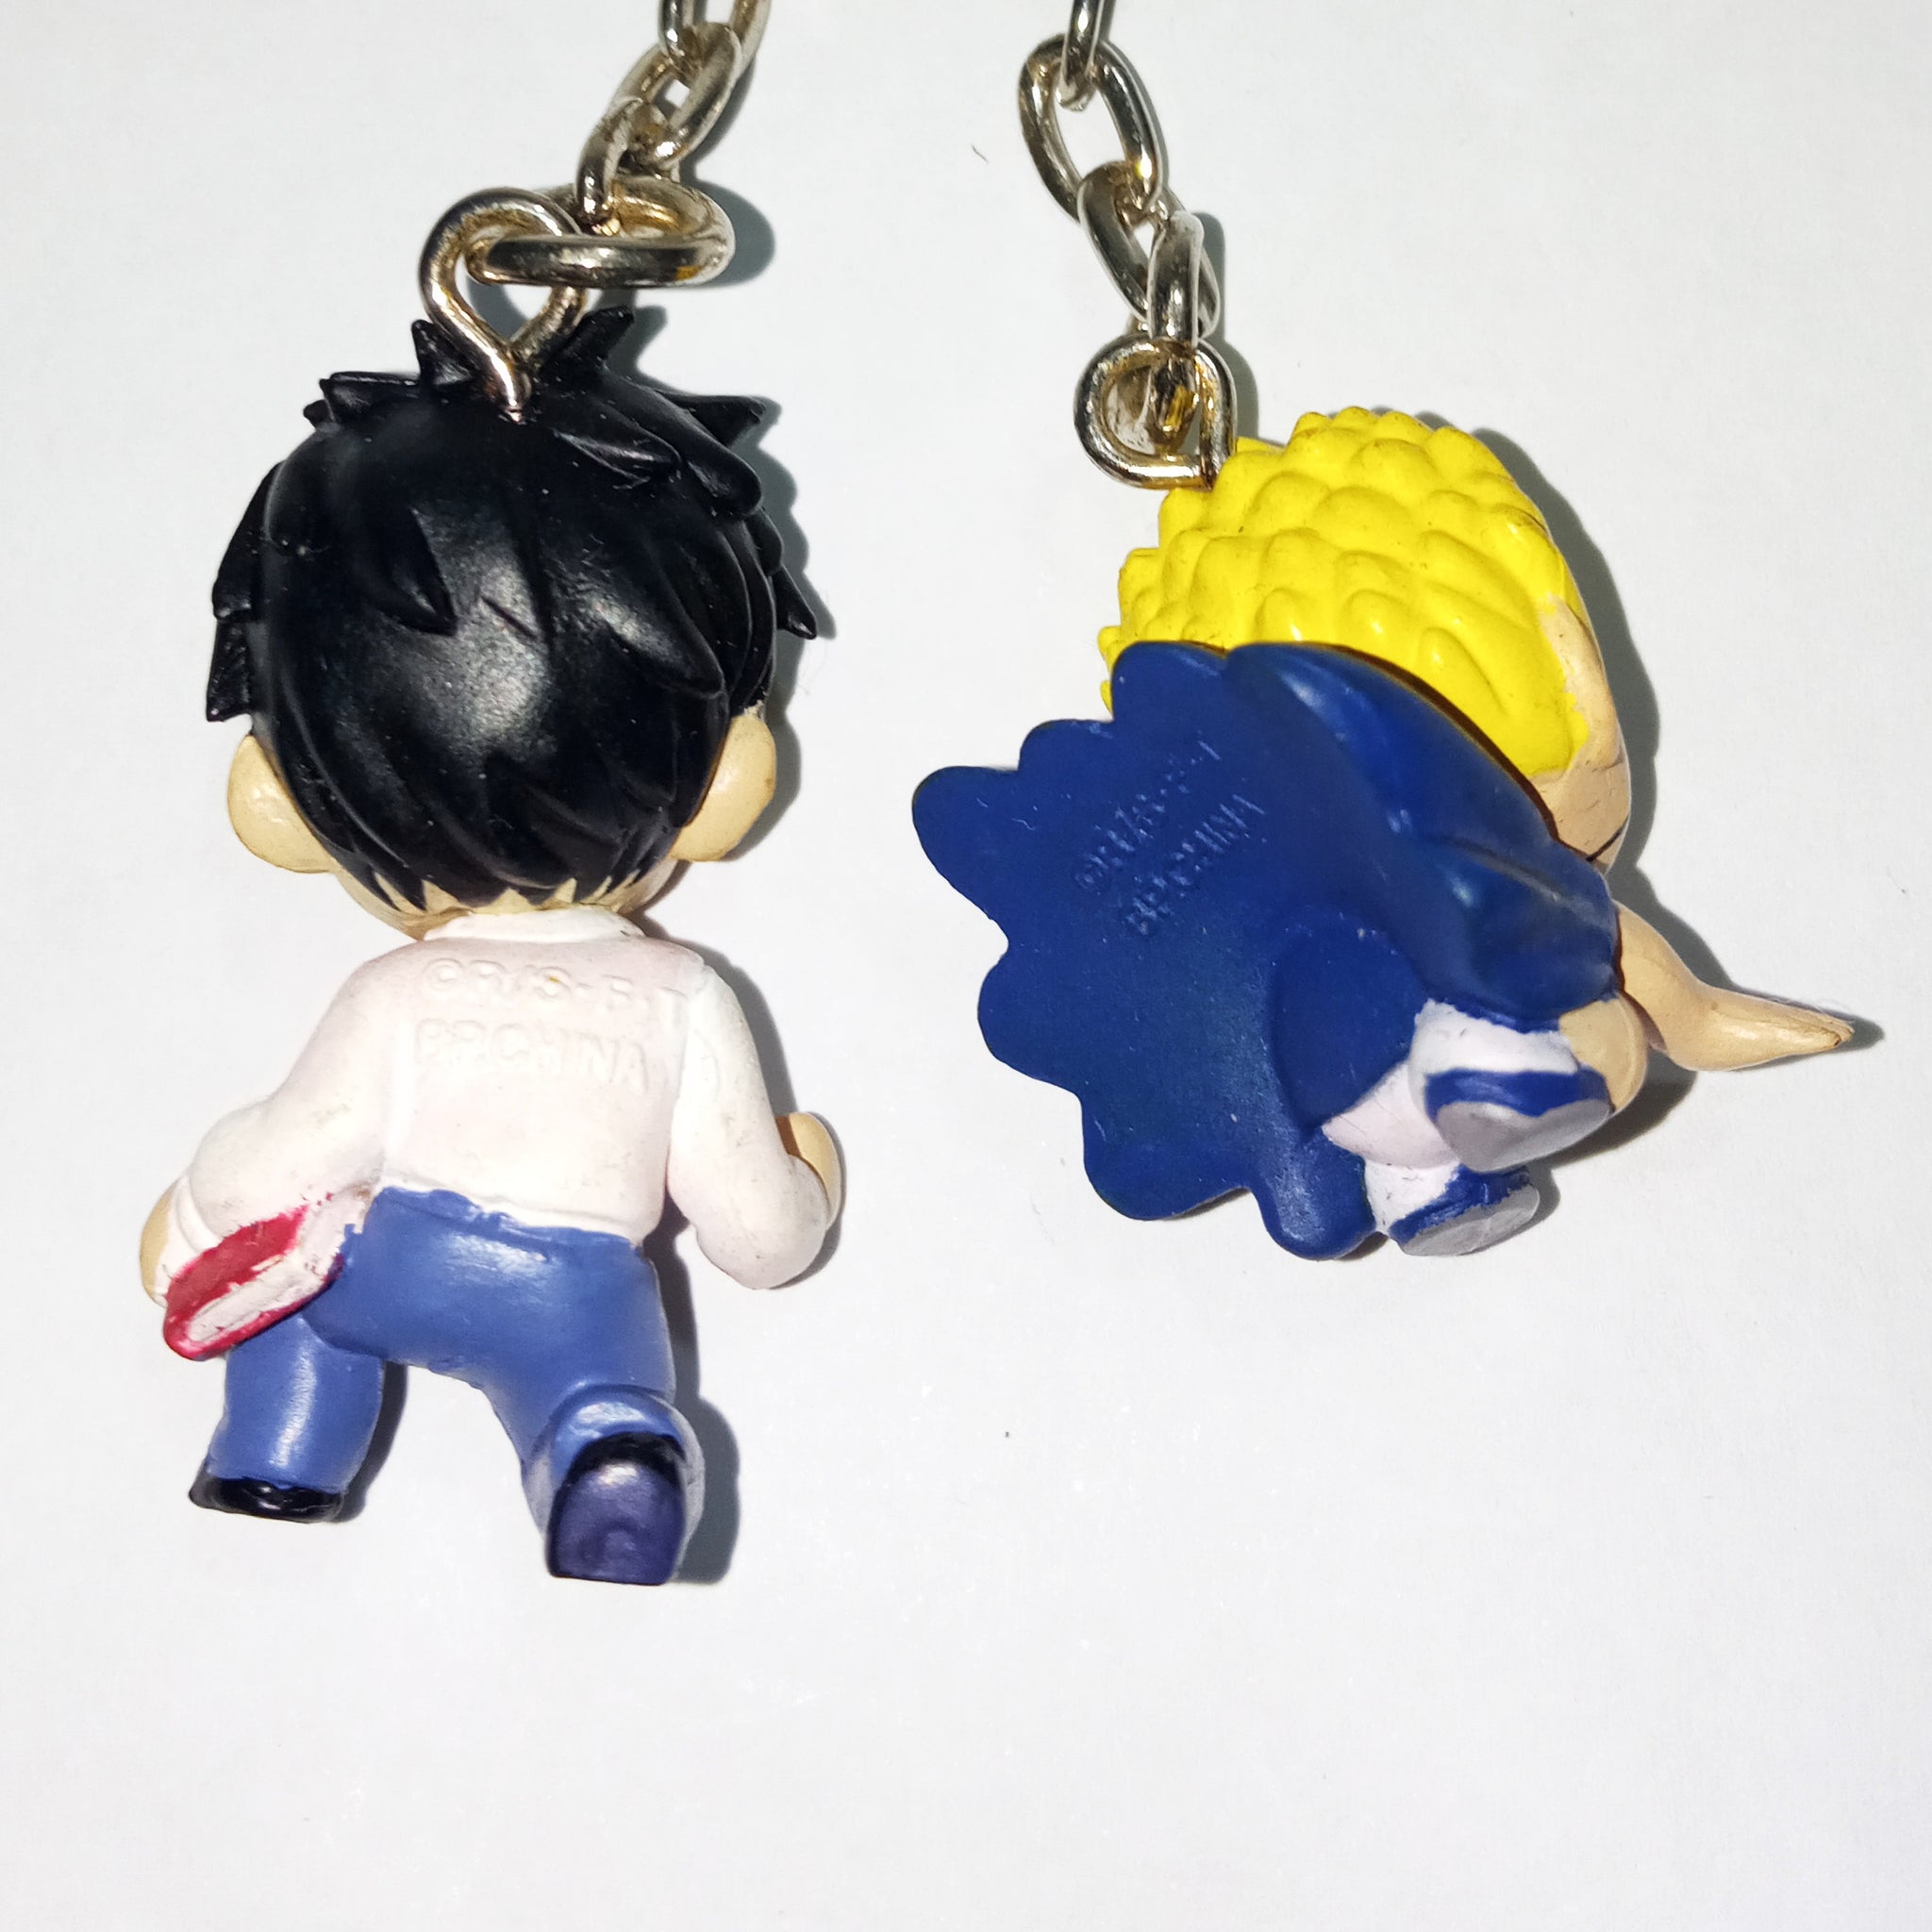 Buy Zatch Bell: Zatch and Kiyo Figures Online at Low Prices in